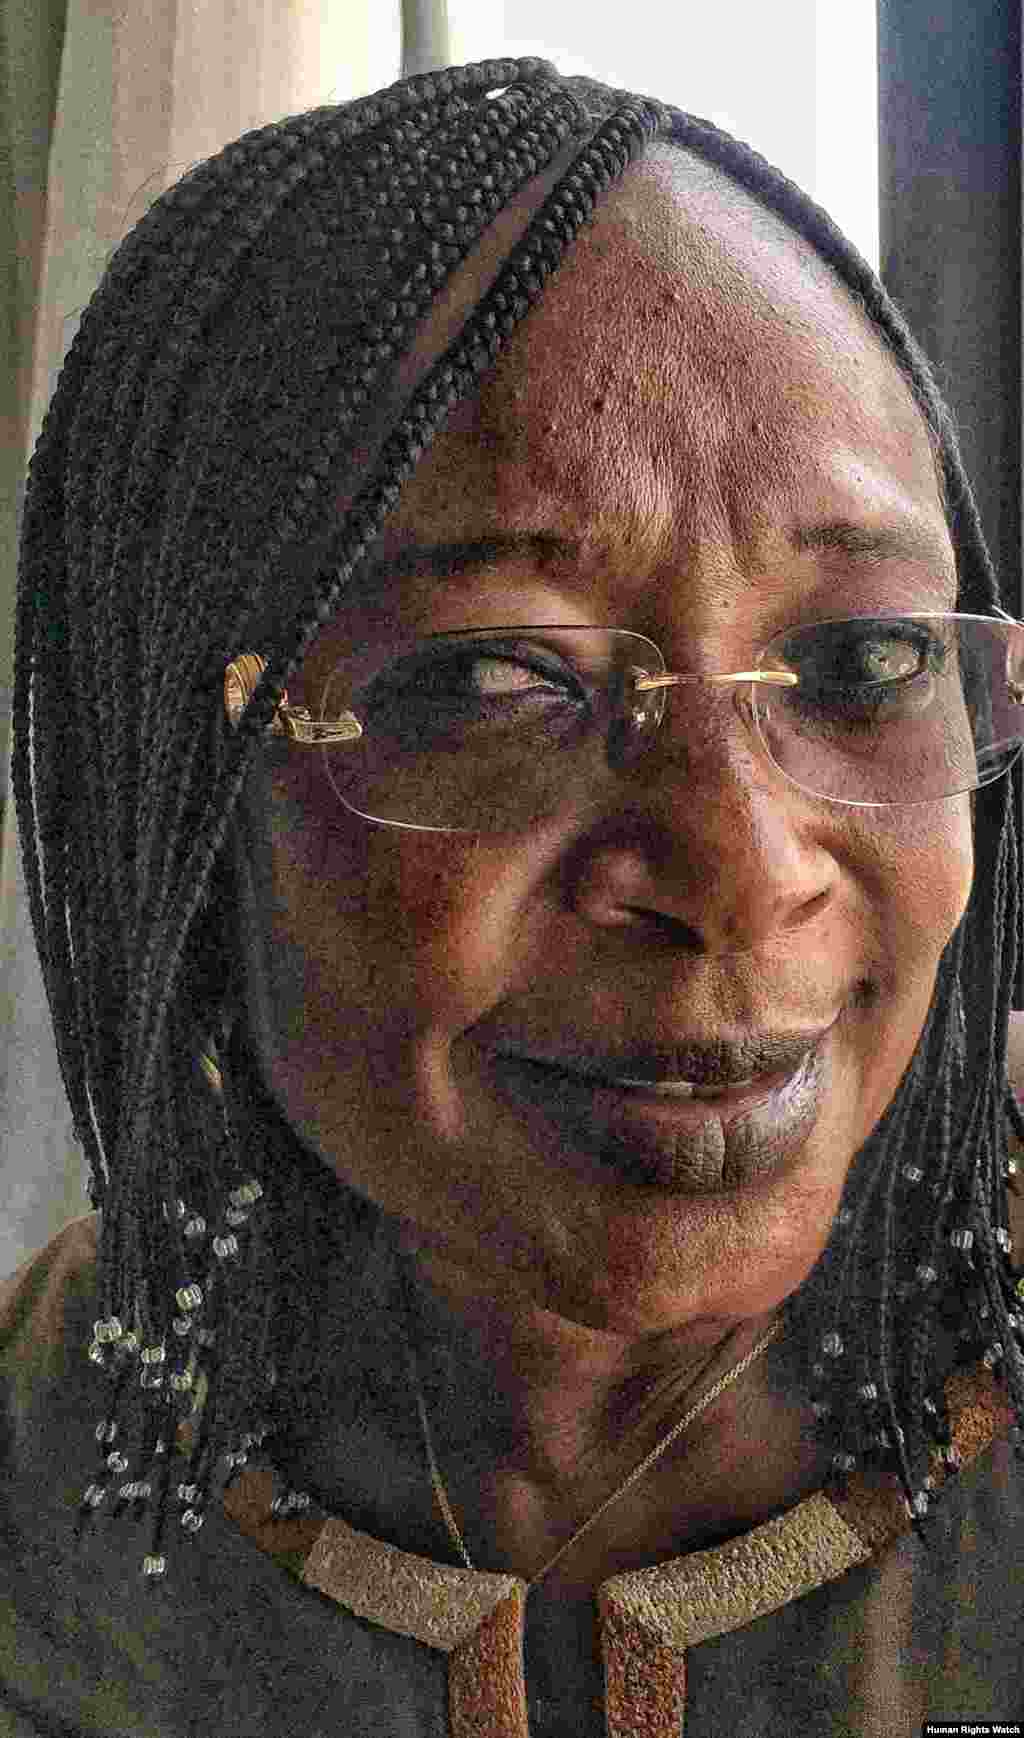 Jacqueline Moudeina, the victims’ lead lawyer, has risked everything, including her life, to bring Habré to justice. An icon of dignity, she still has shrapnel in her leg from 2001, when one of Habré's security chiefs, who had returned as police chief of 